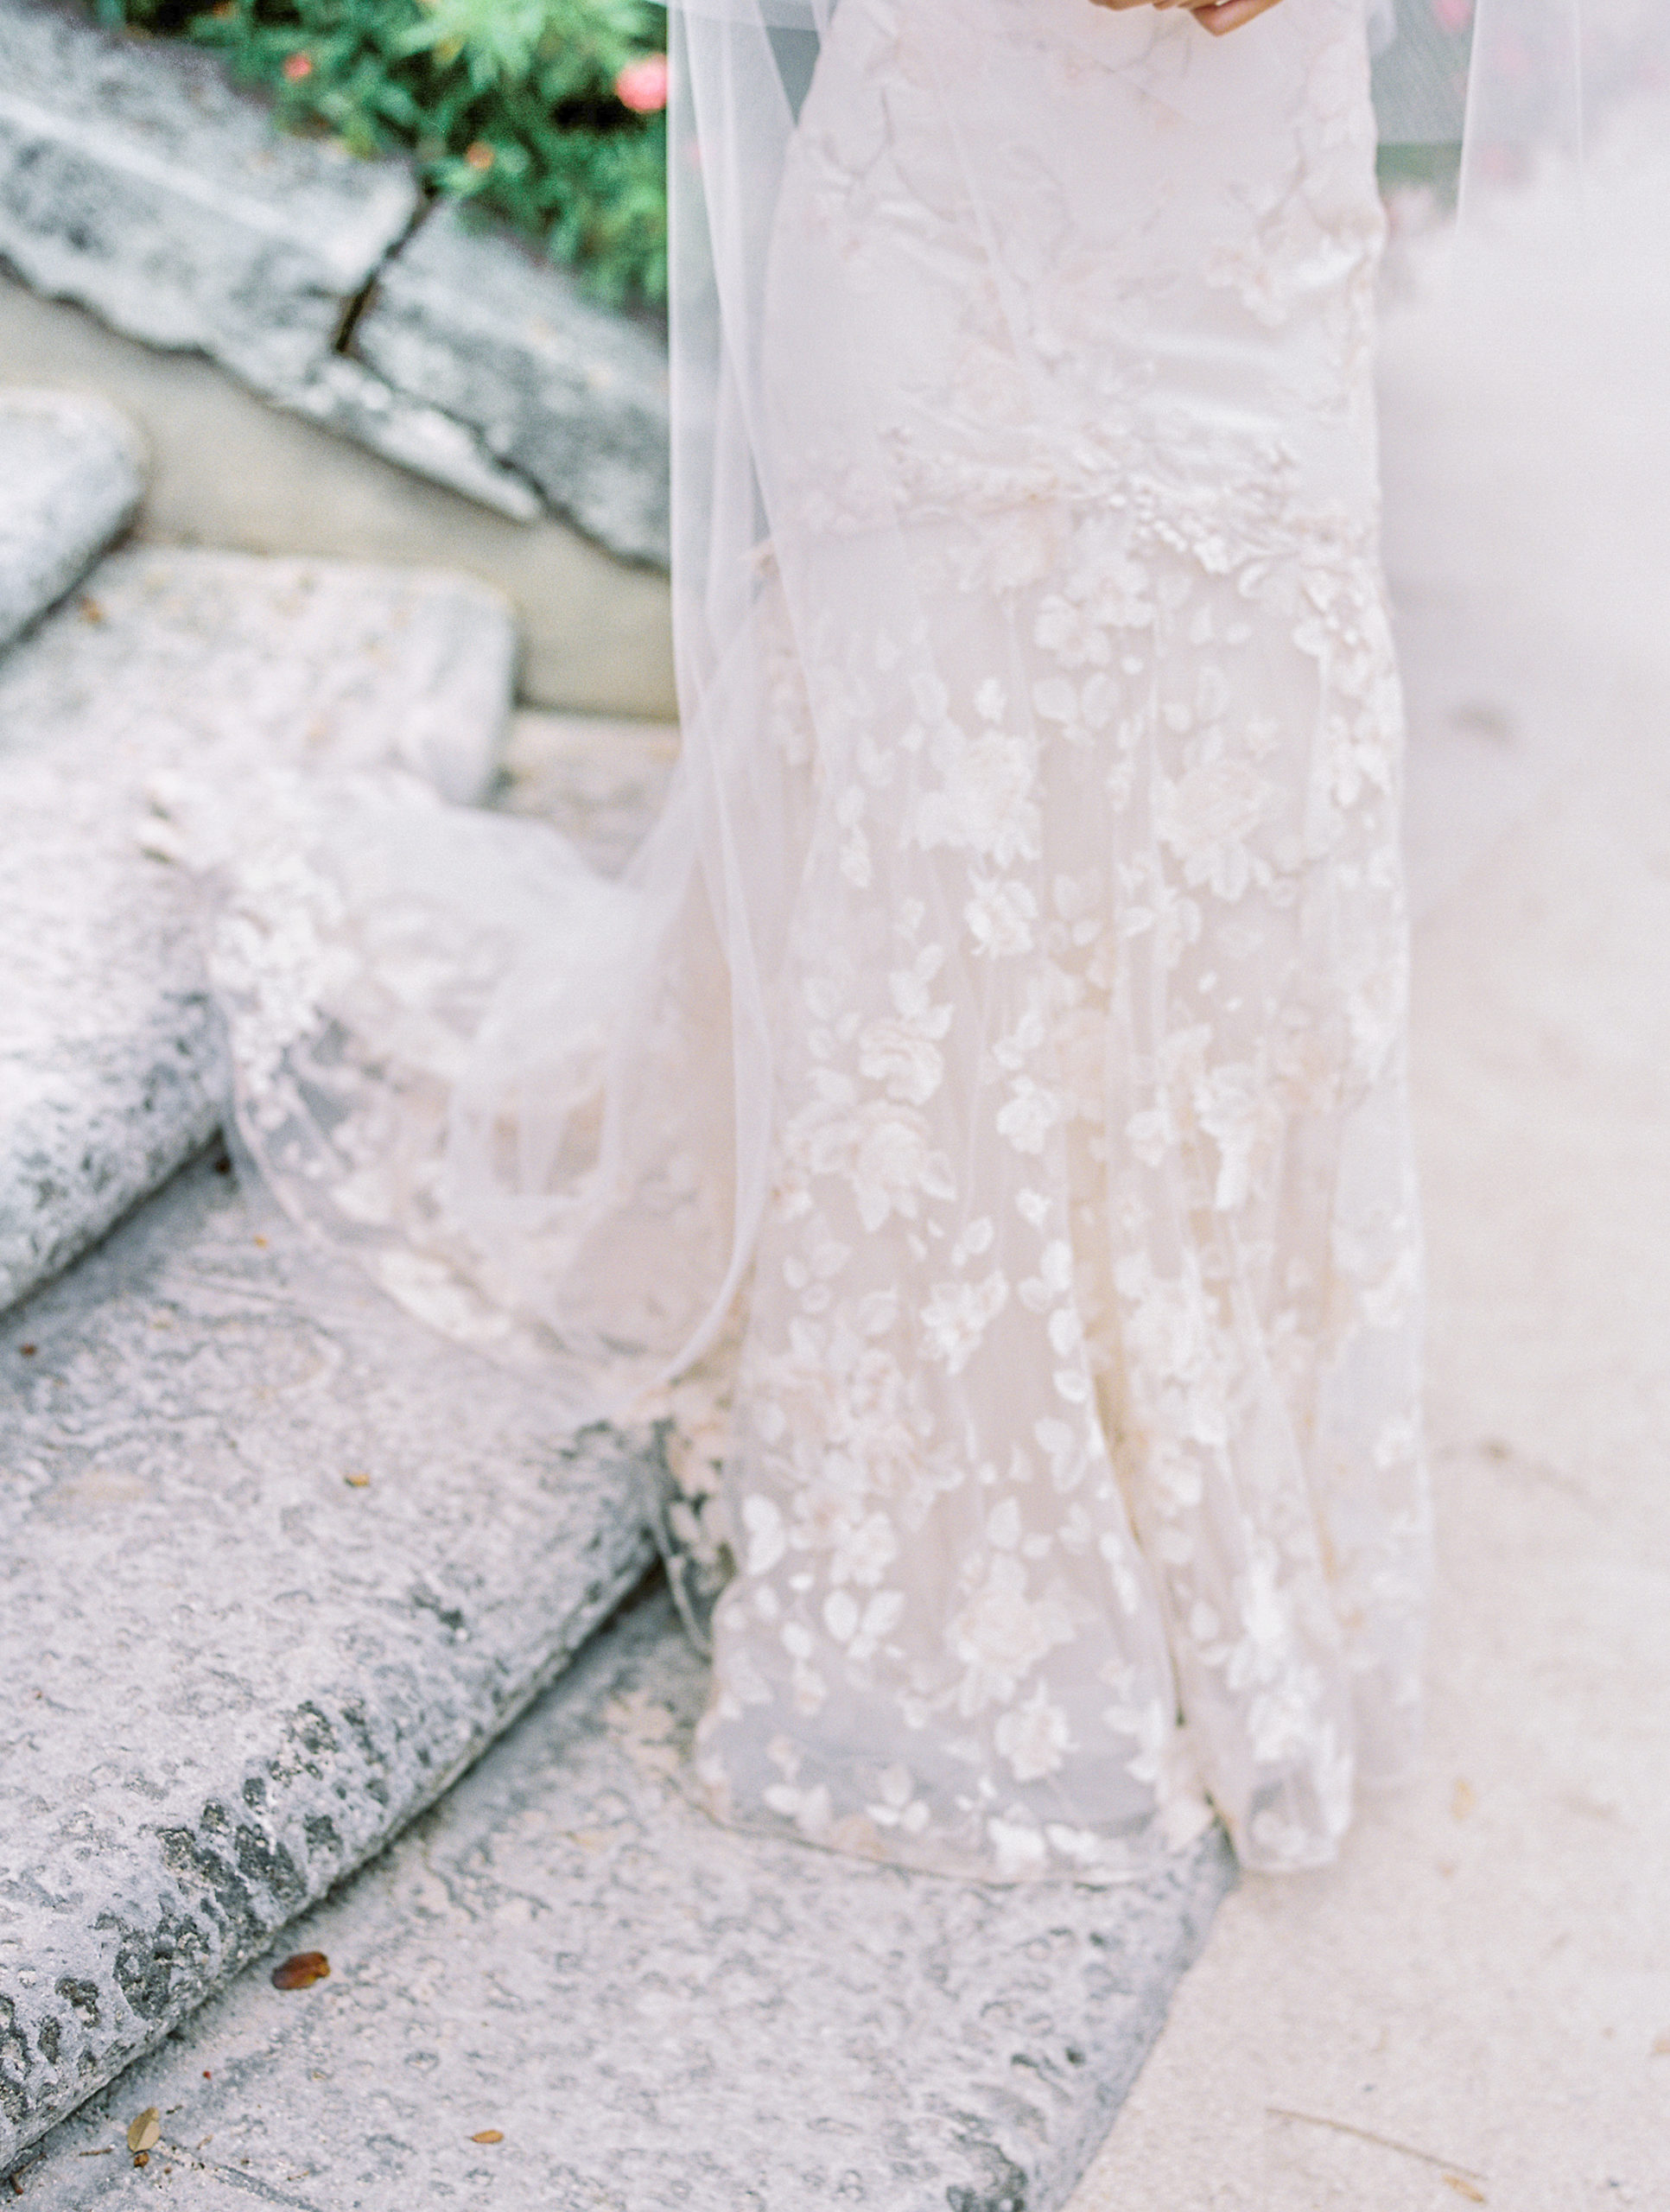 detail of claire pettibone dress on stone steps